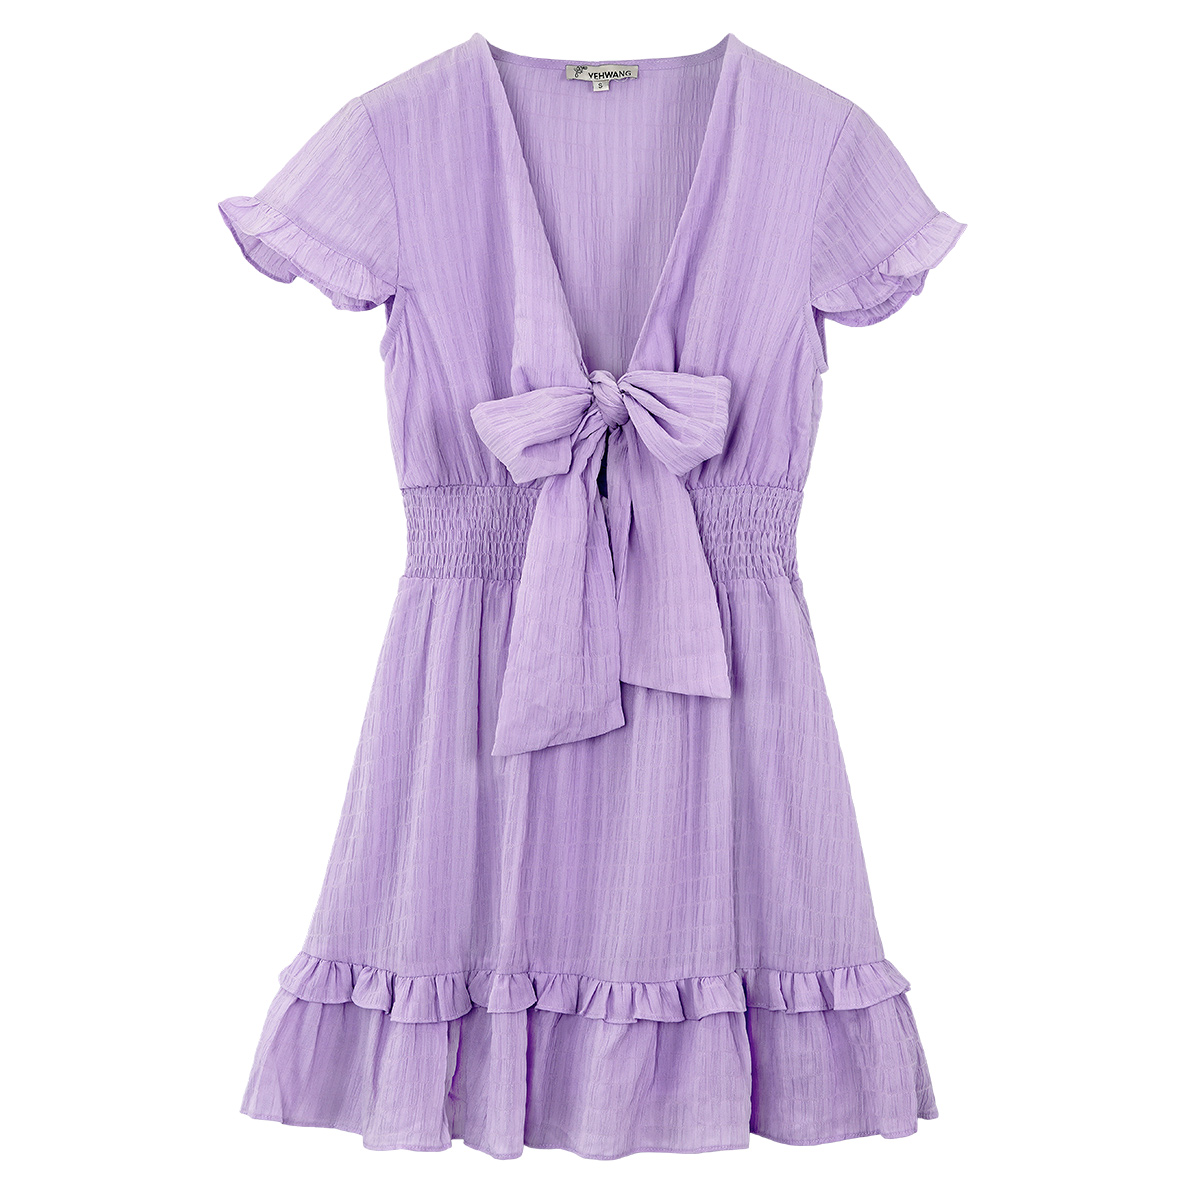 Ruffle dress with bow